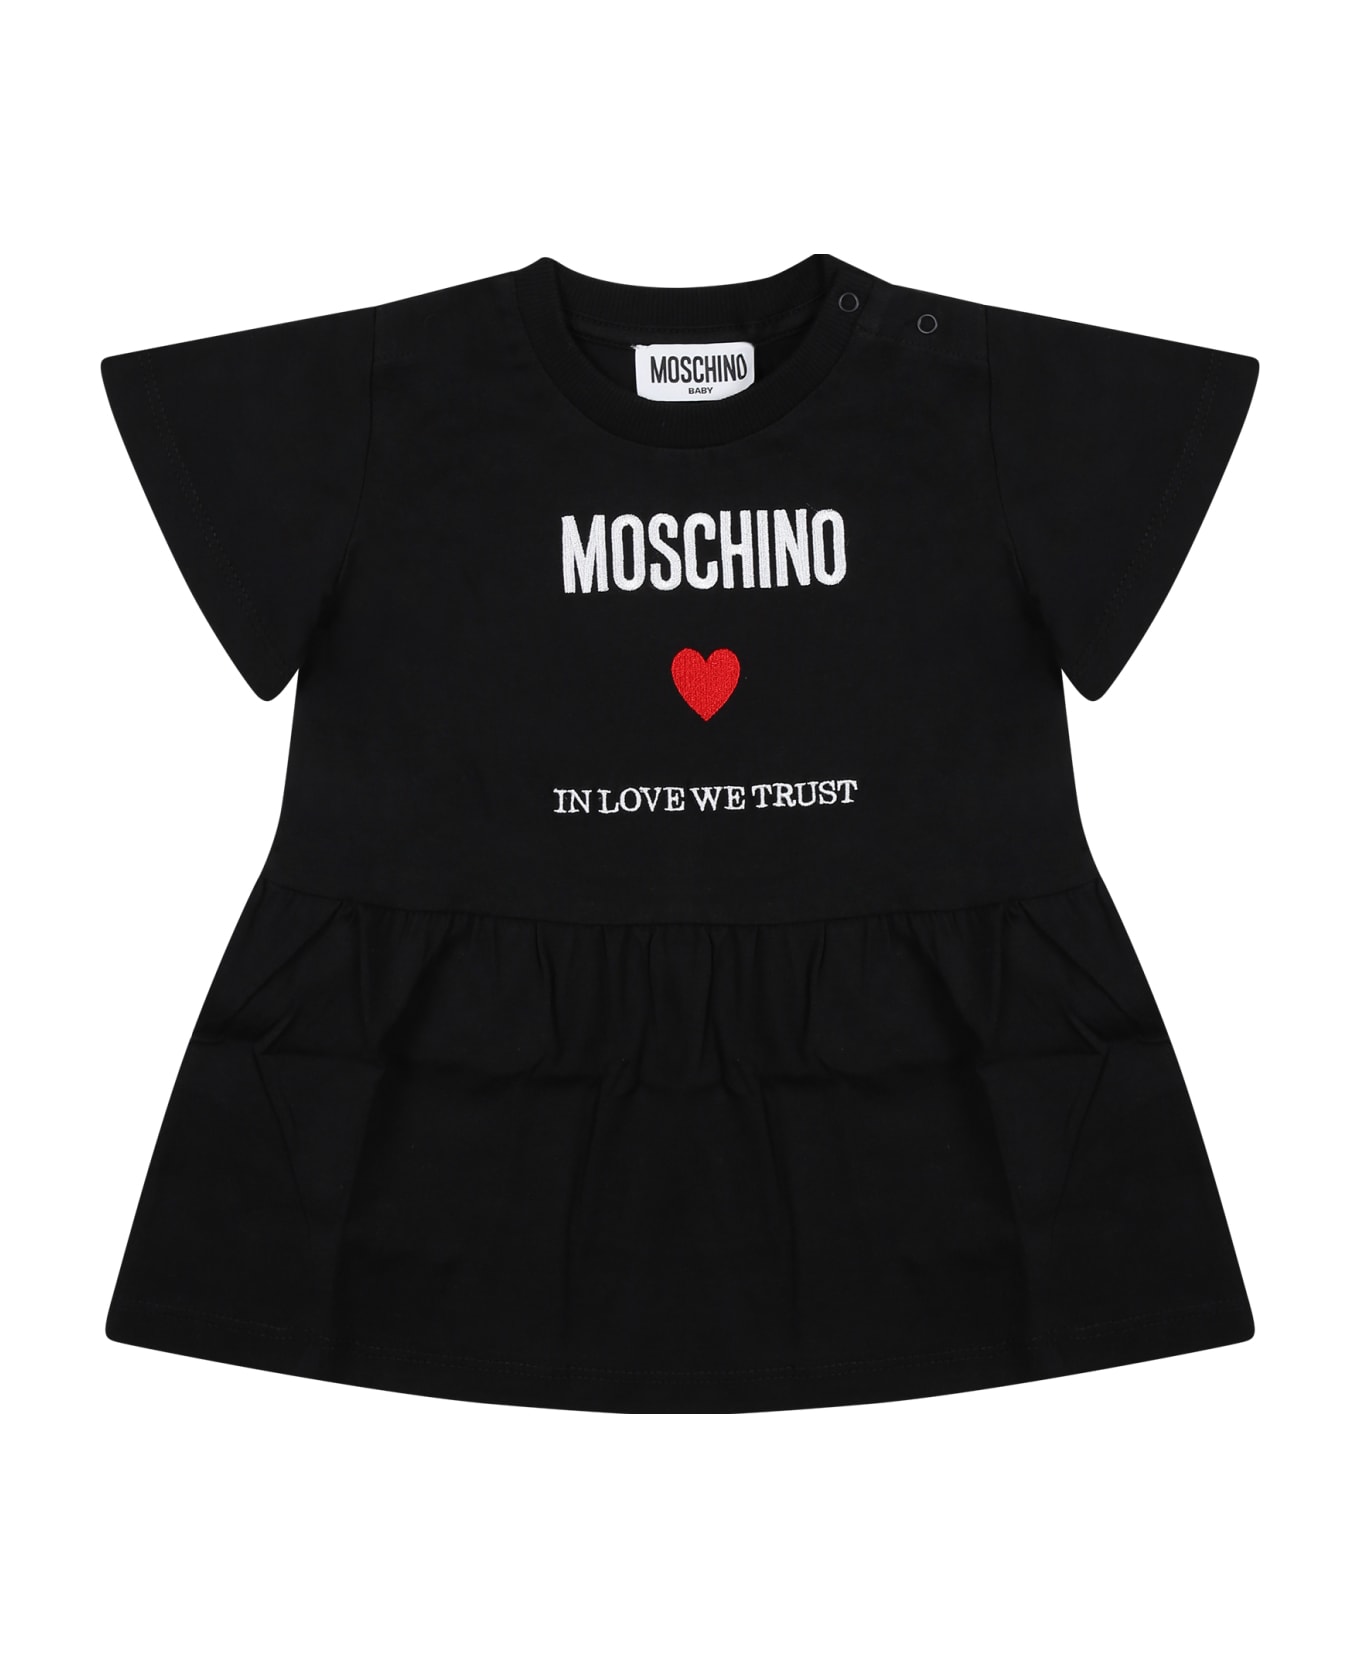 Moschino Black Dress For Baby Girl With Logo And Heart - Black